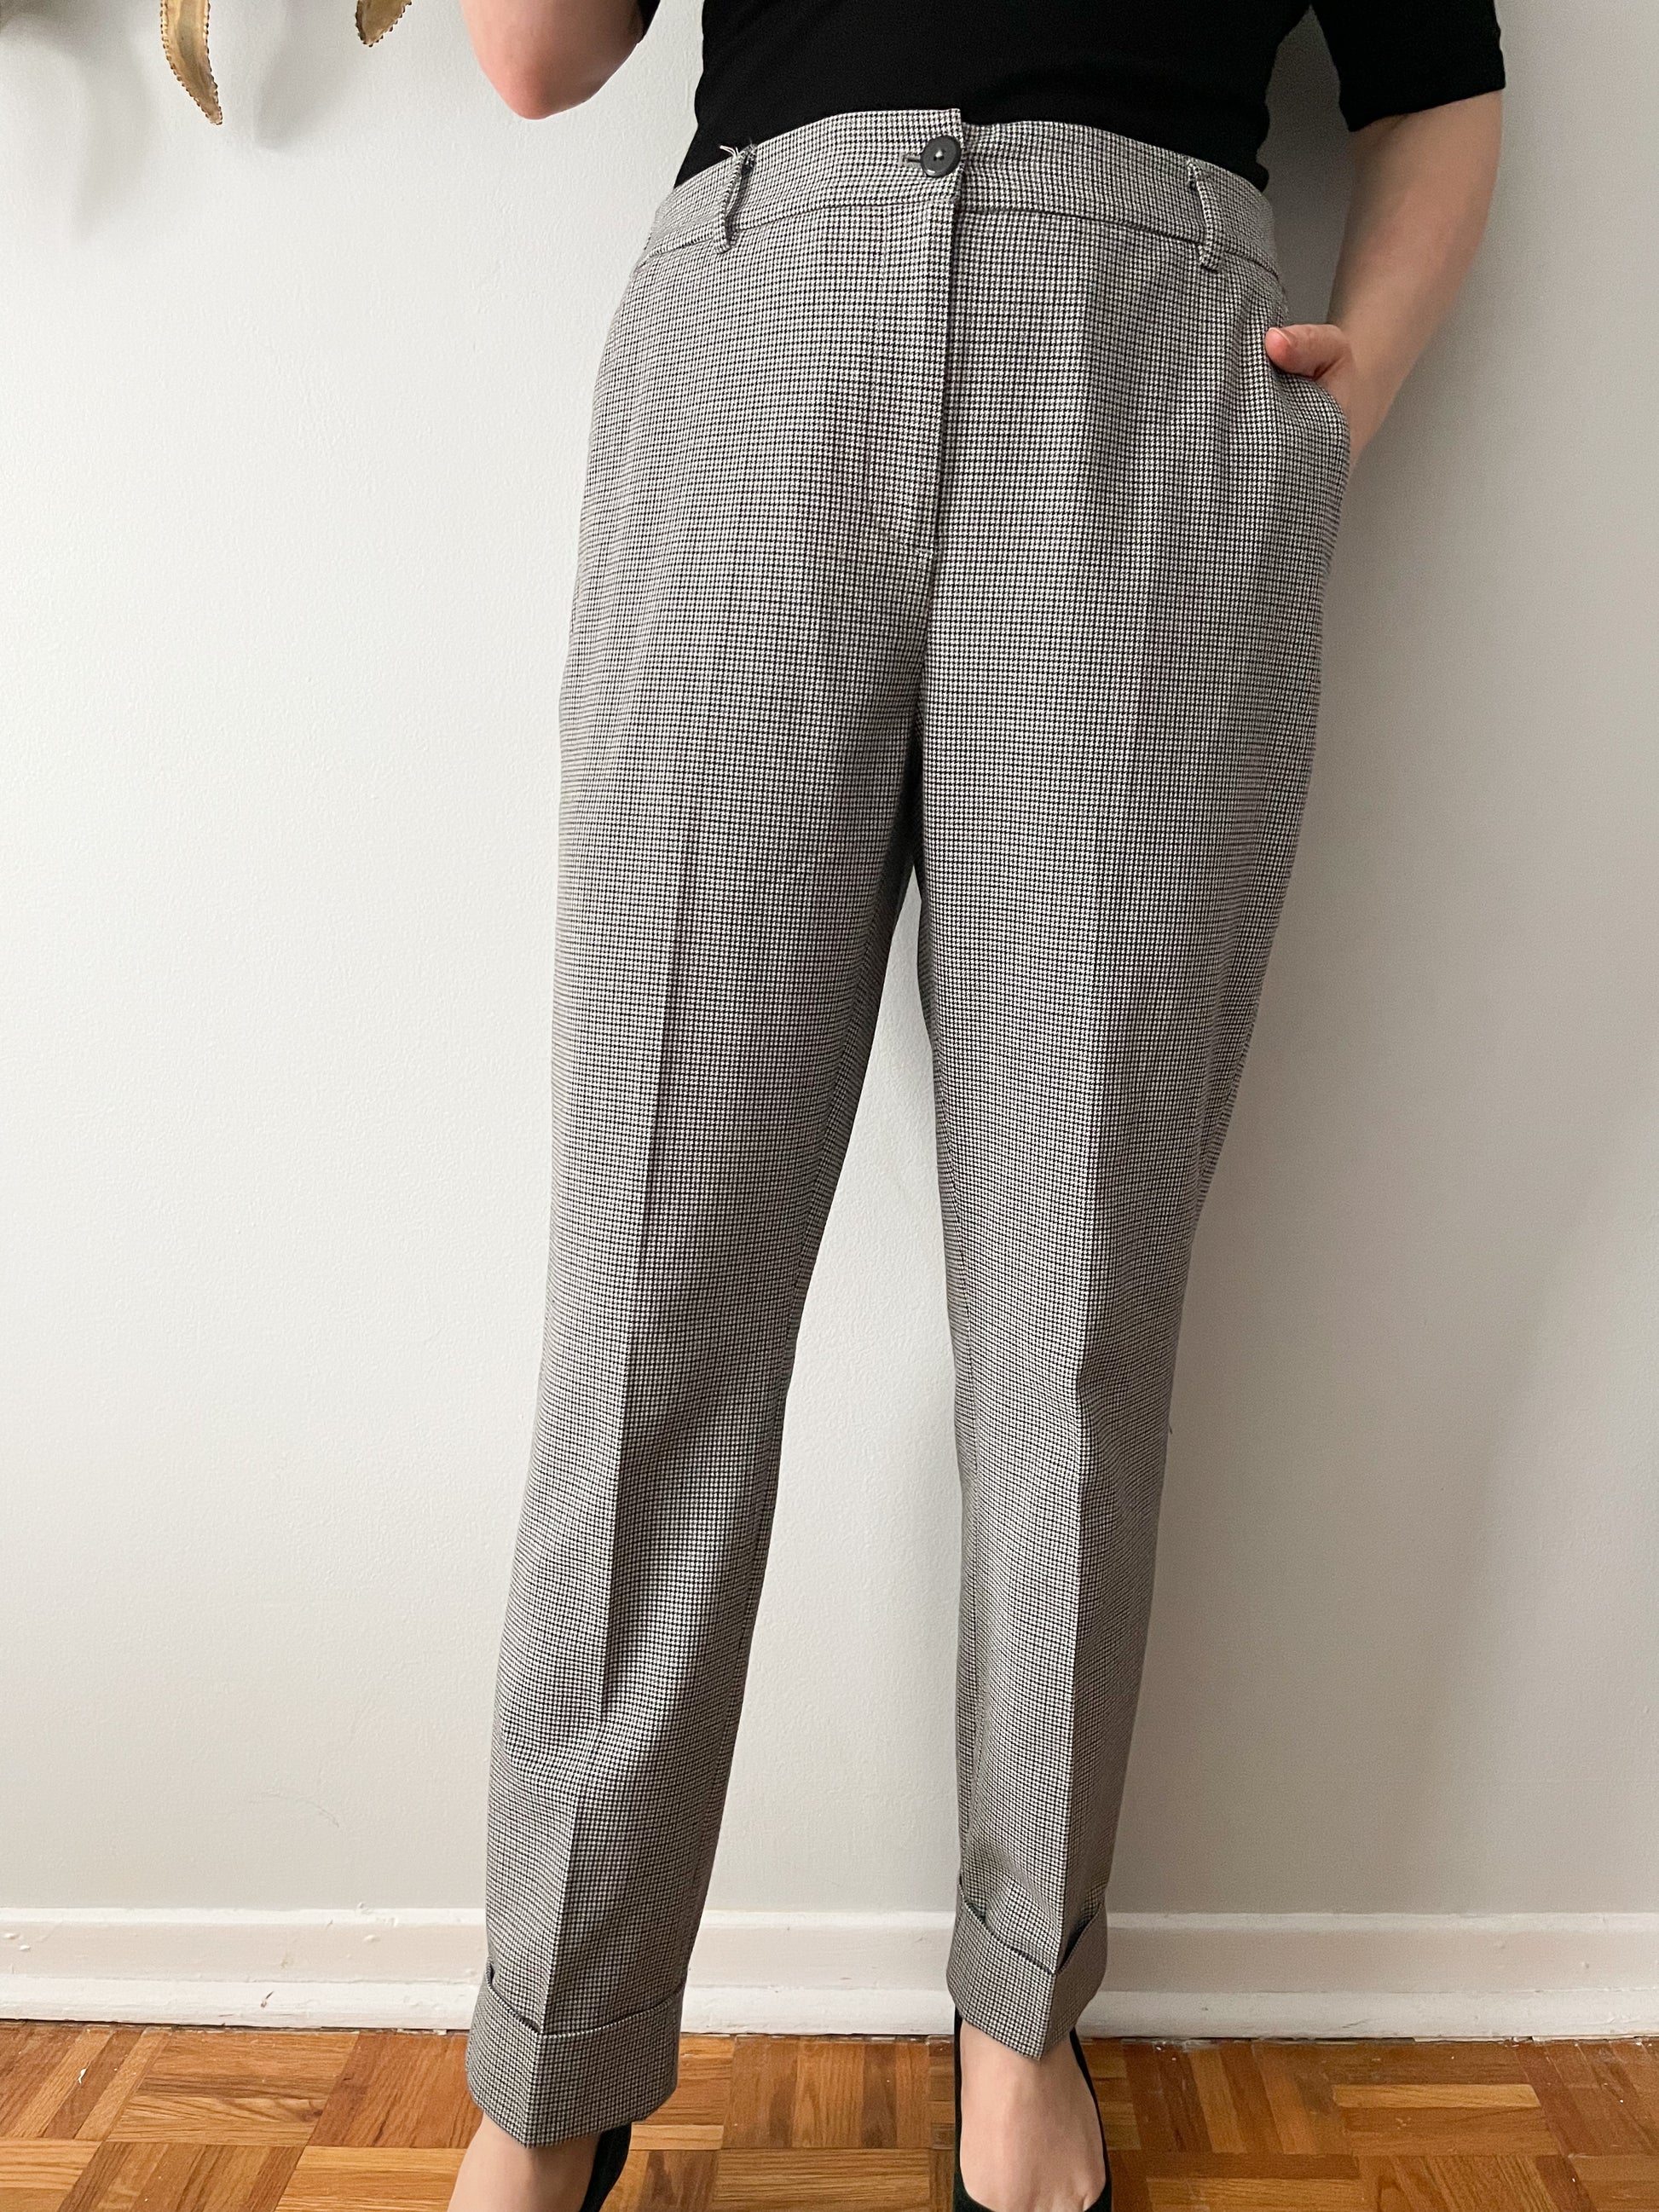 The Houndstooth Pants